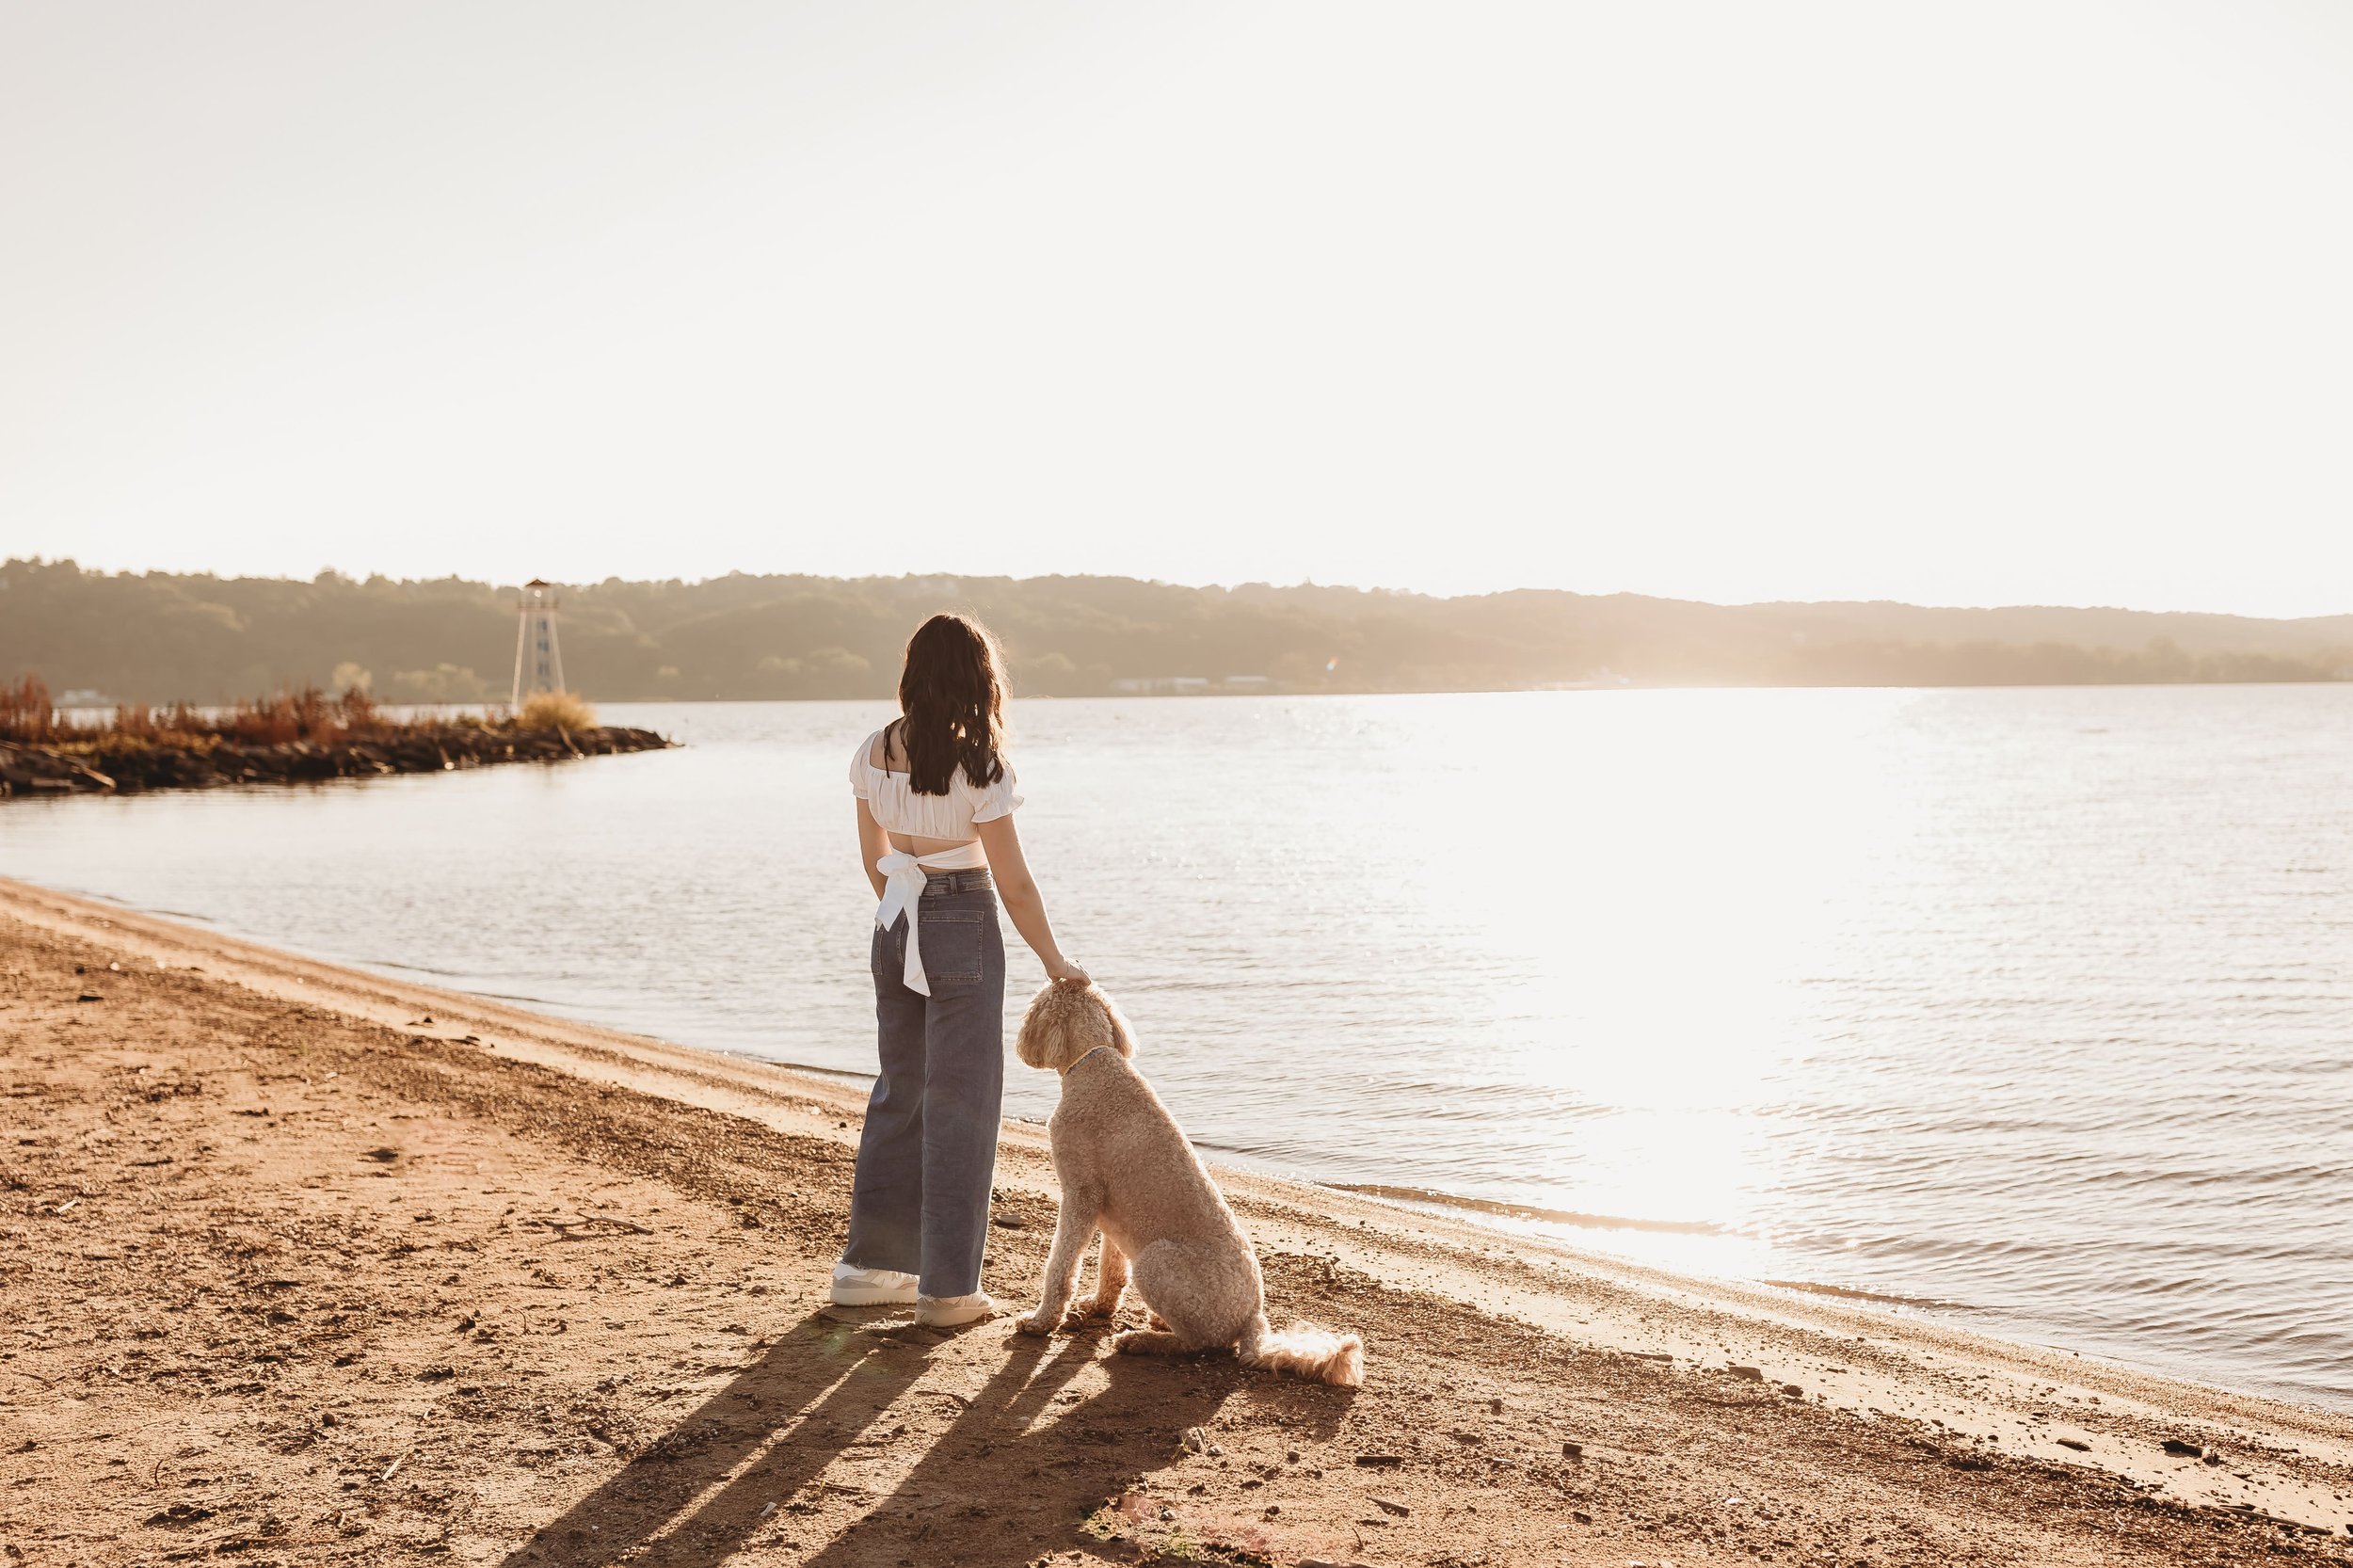  olivia looks out over the water with her pup for her senior pictures beach front in central illinois 